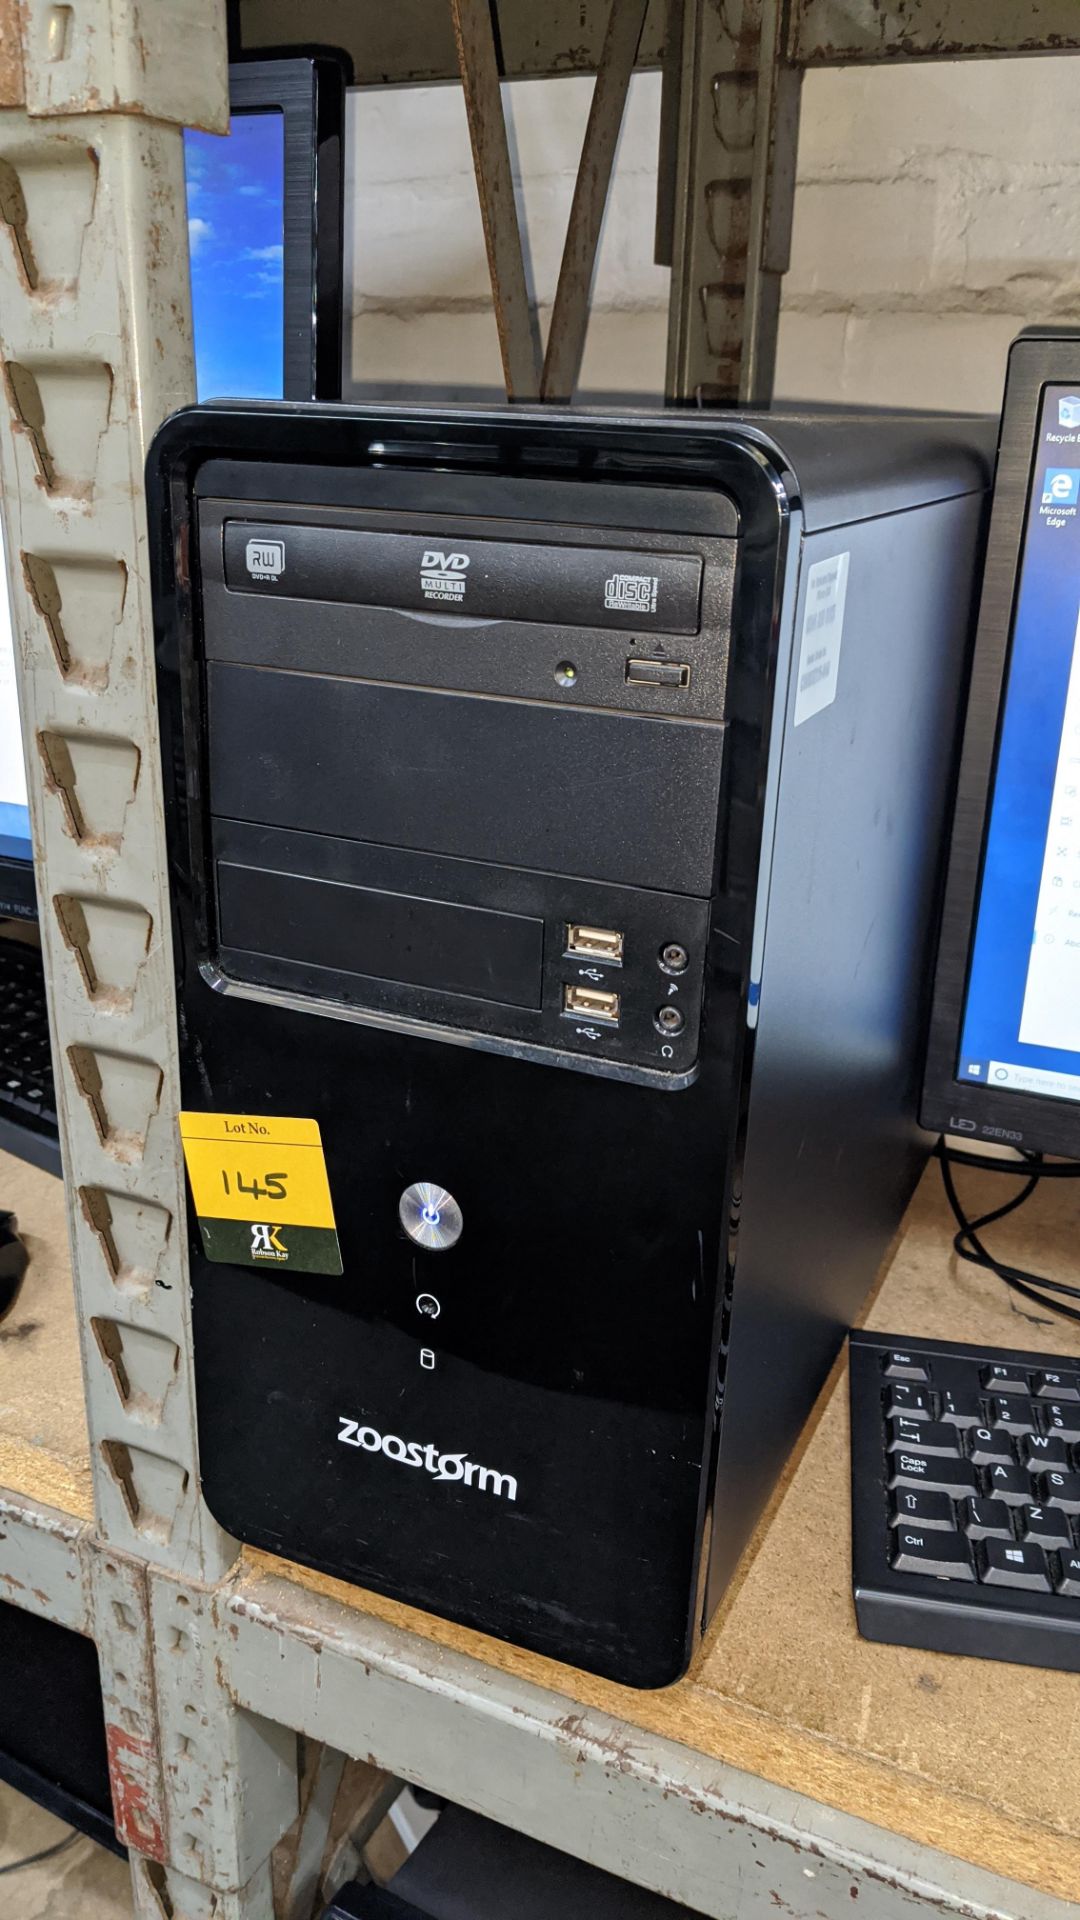 Zoostorm desktop PC with Intel Core i5-4460 CPU @ 3.2GHz, 8Gb RAM, 500Gb HDD including LG 22" - Image 3 of 4